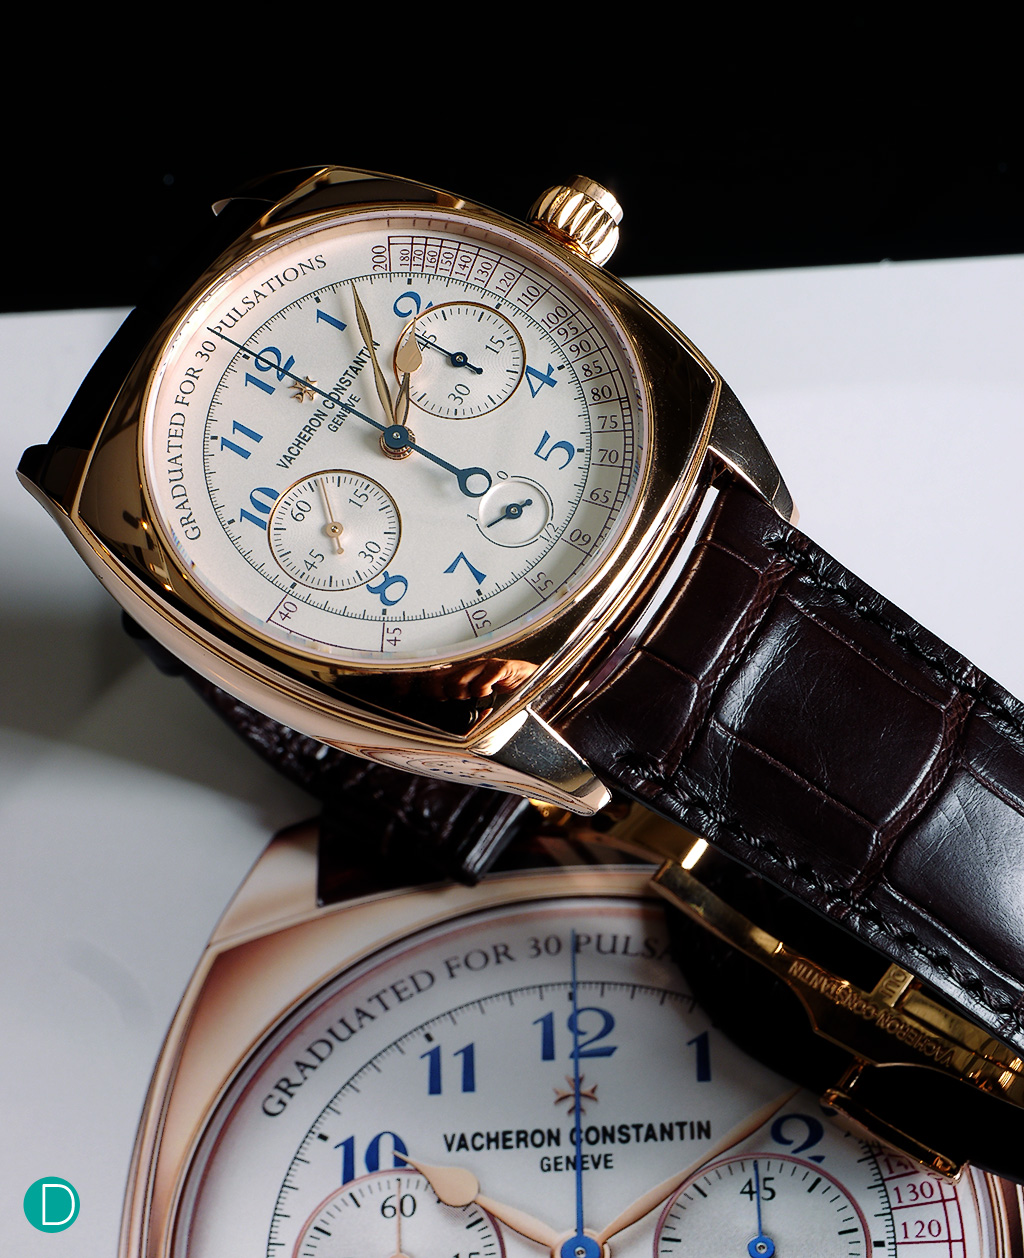 The Vacheron Constantin Single Button Chronograph. Elegant beyond, stylish. And remarkably well finished.